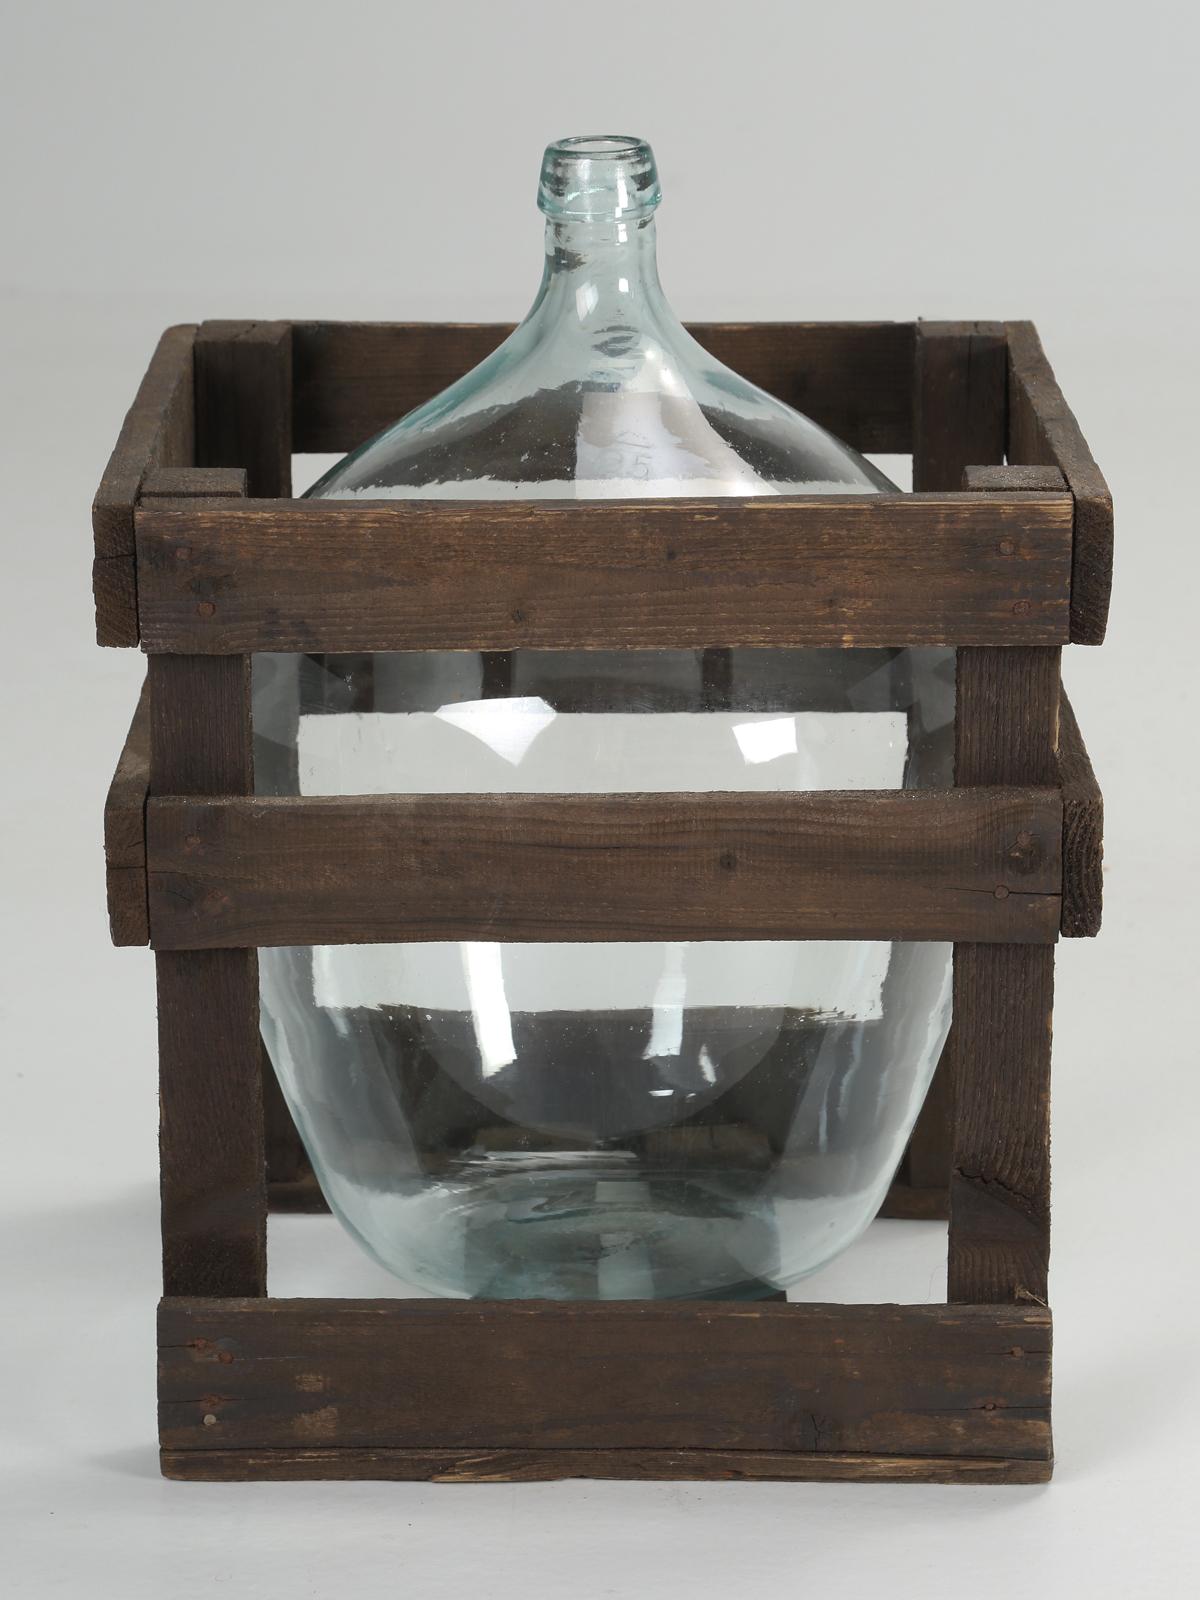 Carboy, demijohn or jimmyjohn, they all refer to a glass vessel. Carboy's originated from the Persian word; qarabah, while demijohn comes from the French, for dame-jeanne, or Lady Jane from the 1700's. Demijohn's refer to any large glass bottle,